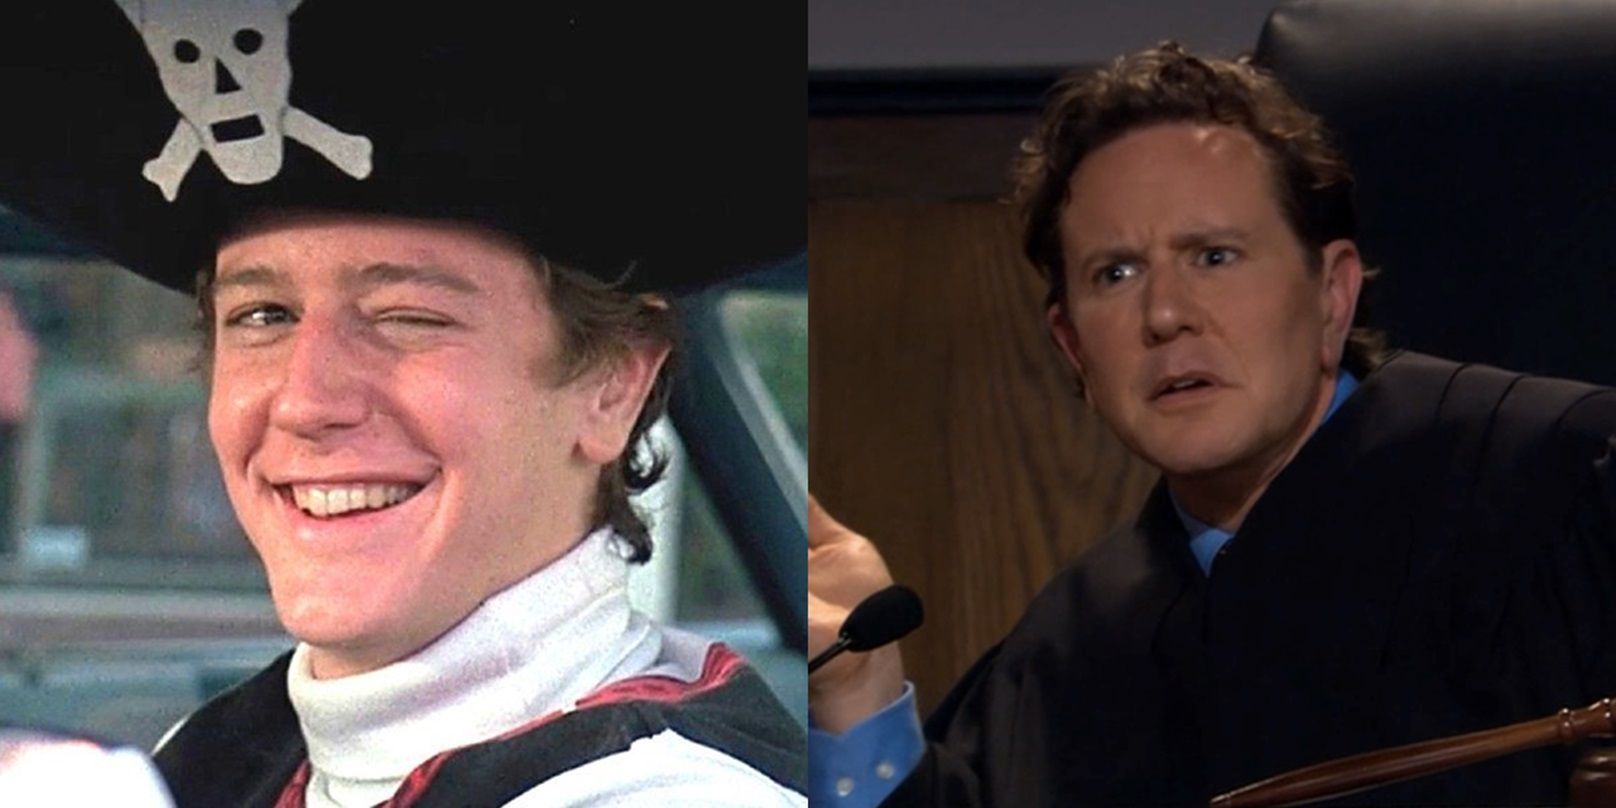 A split image of Judge Reinhold in Ridgemont High and Fast Times in Arrested Development